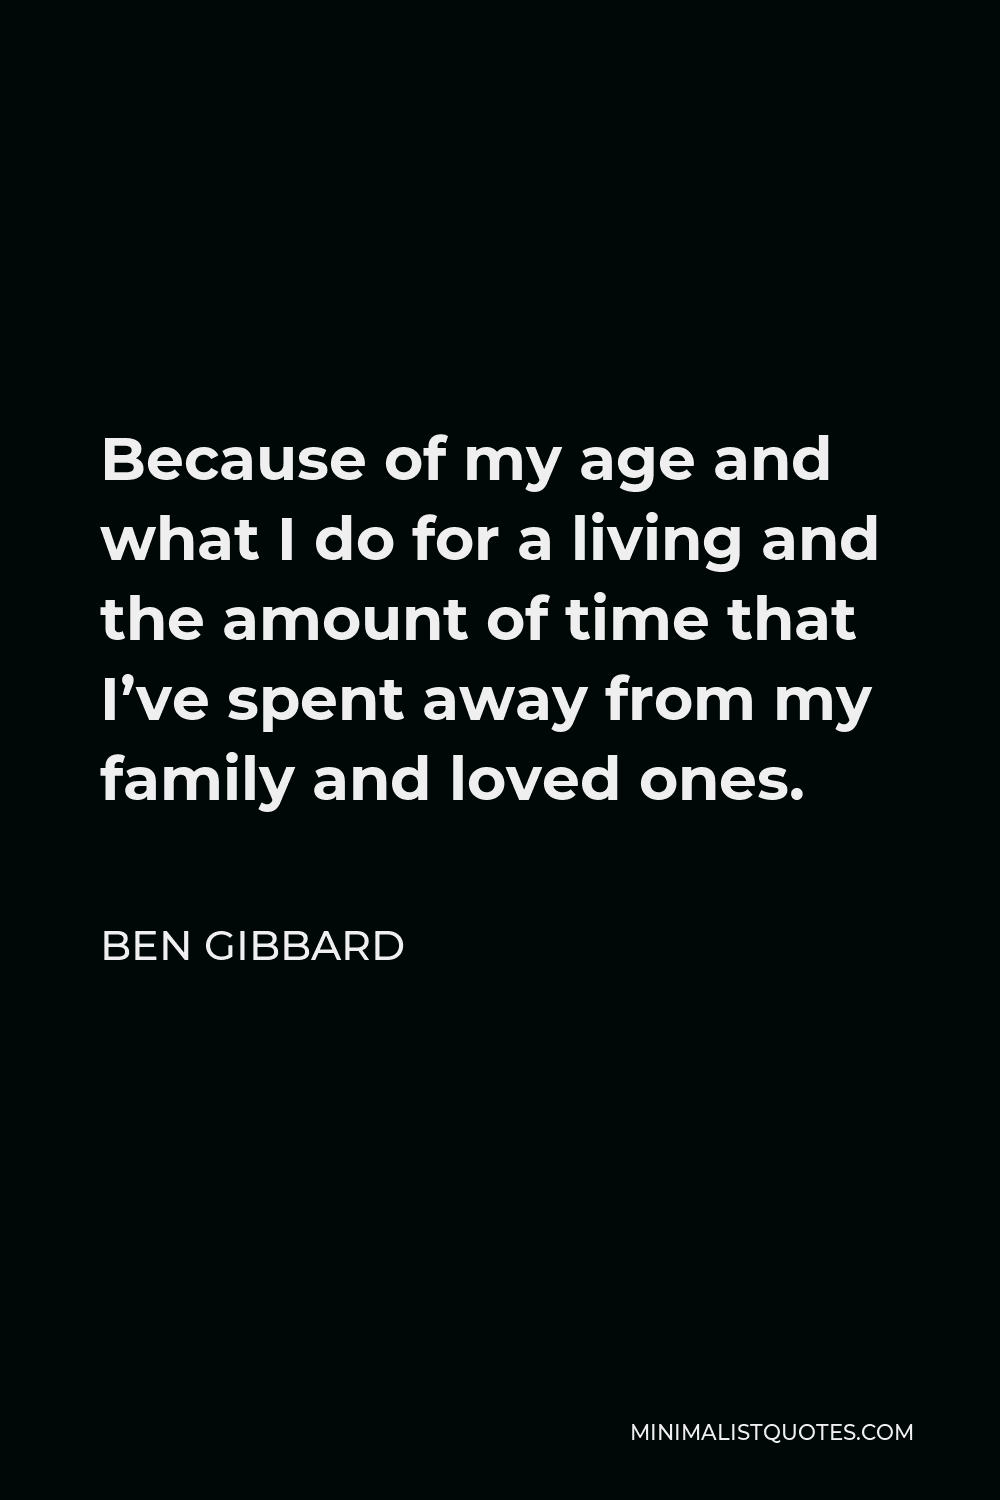 Ben Gibbard Quote - Because of my age and what I do for a living and the amount of time that I’ve spent away from my family and loved ones.